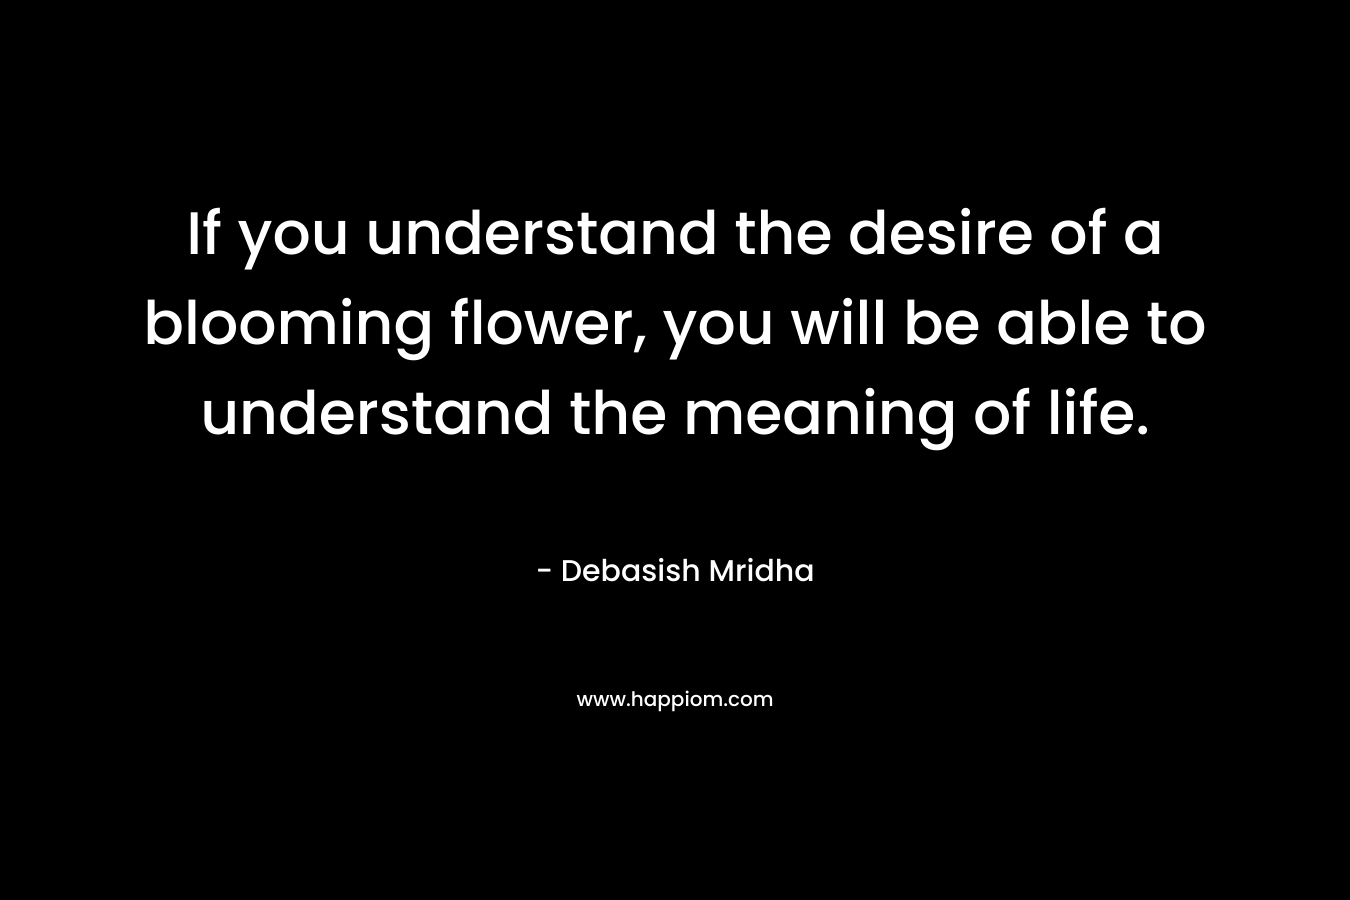 If you understand the desire of a blooming flower, you will be able to understand the meaning of life. – Debasish Mridha